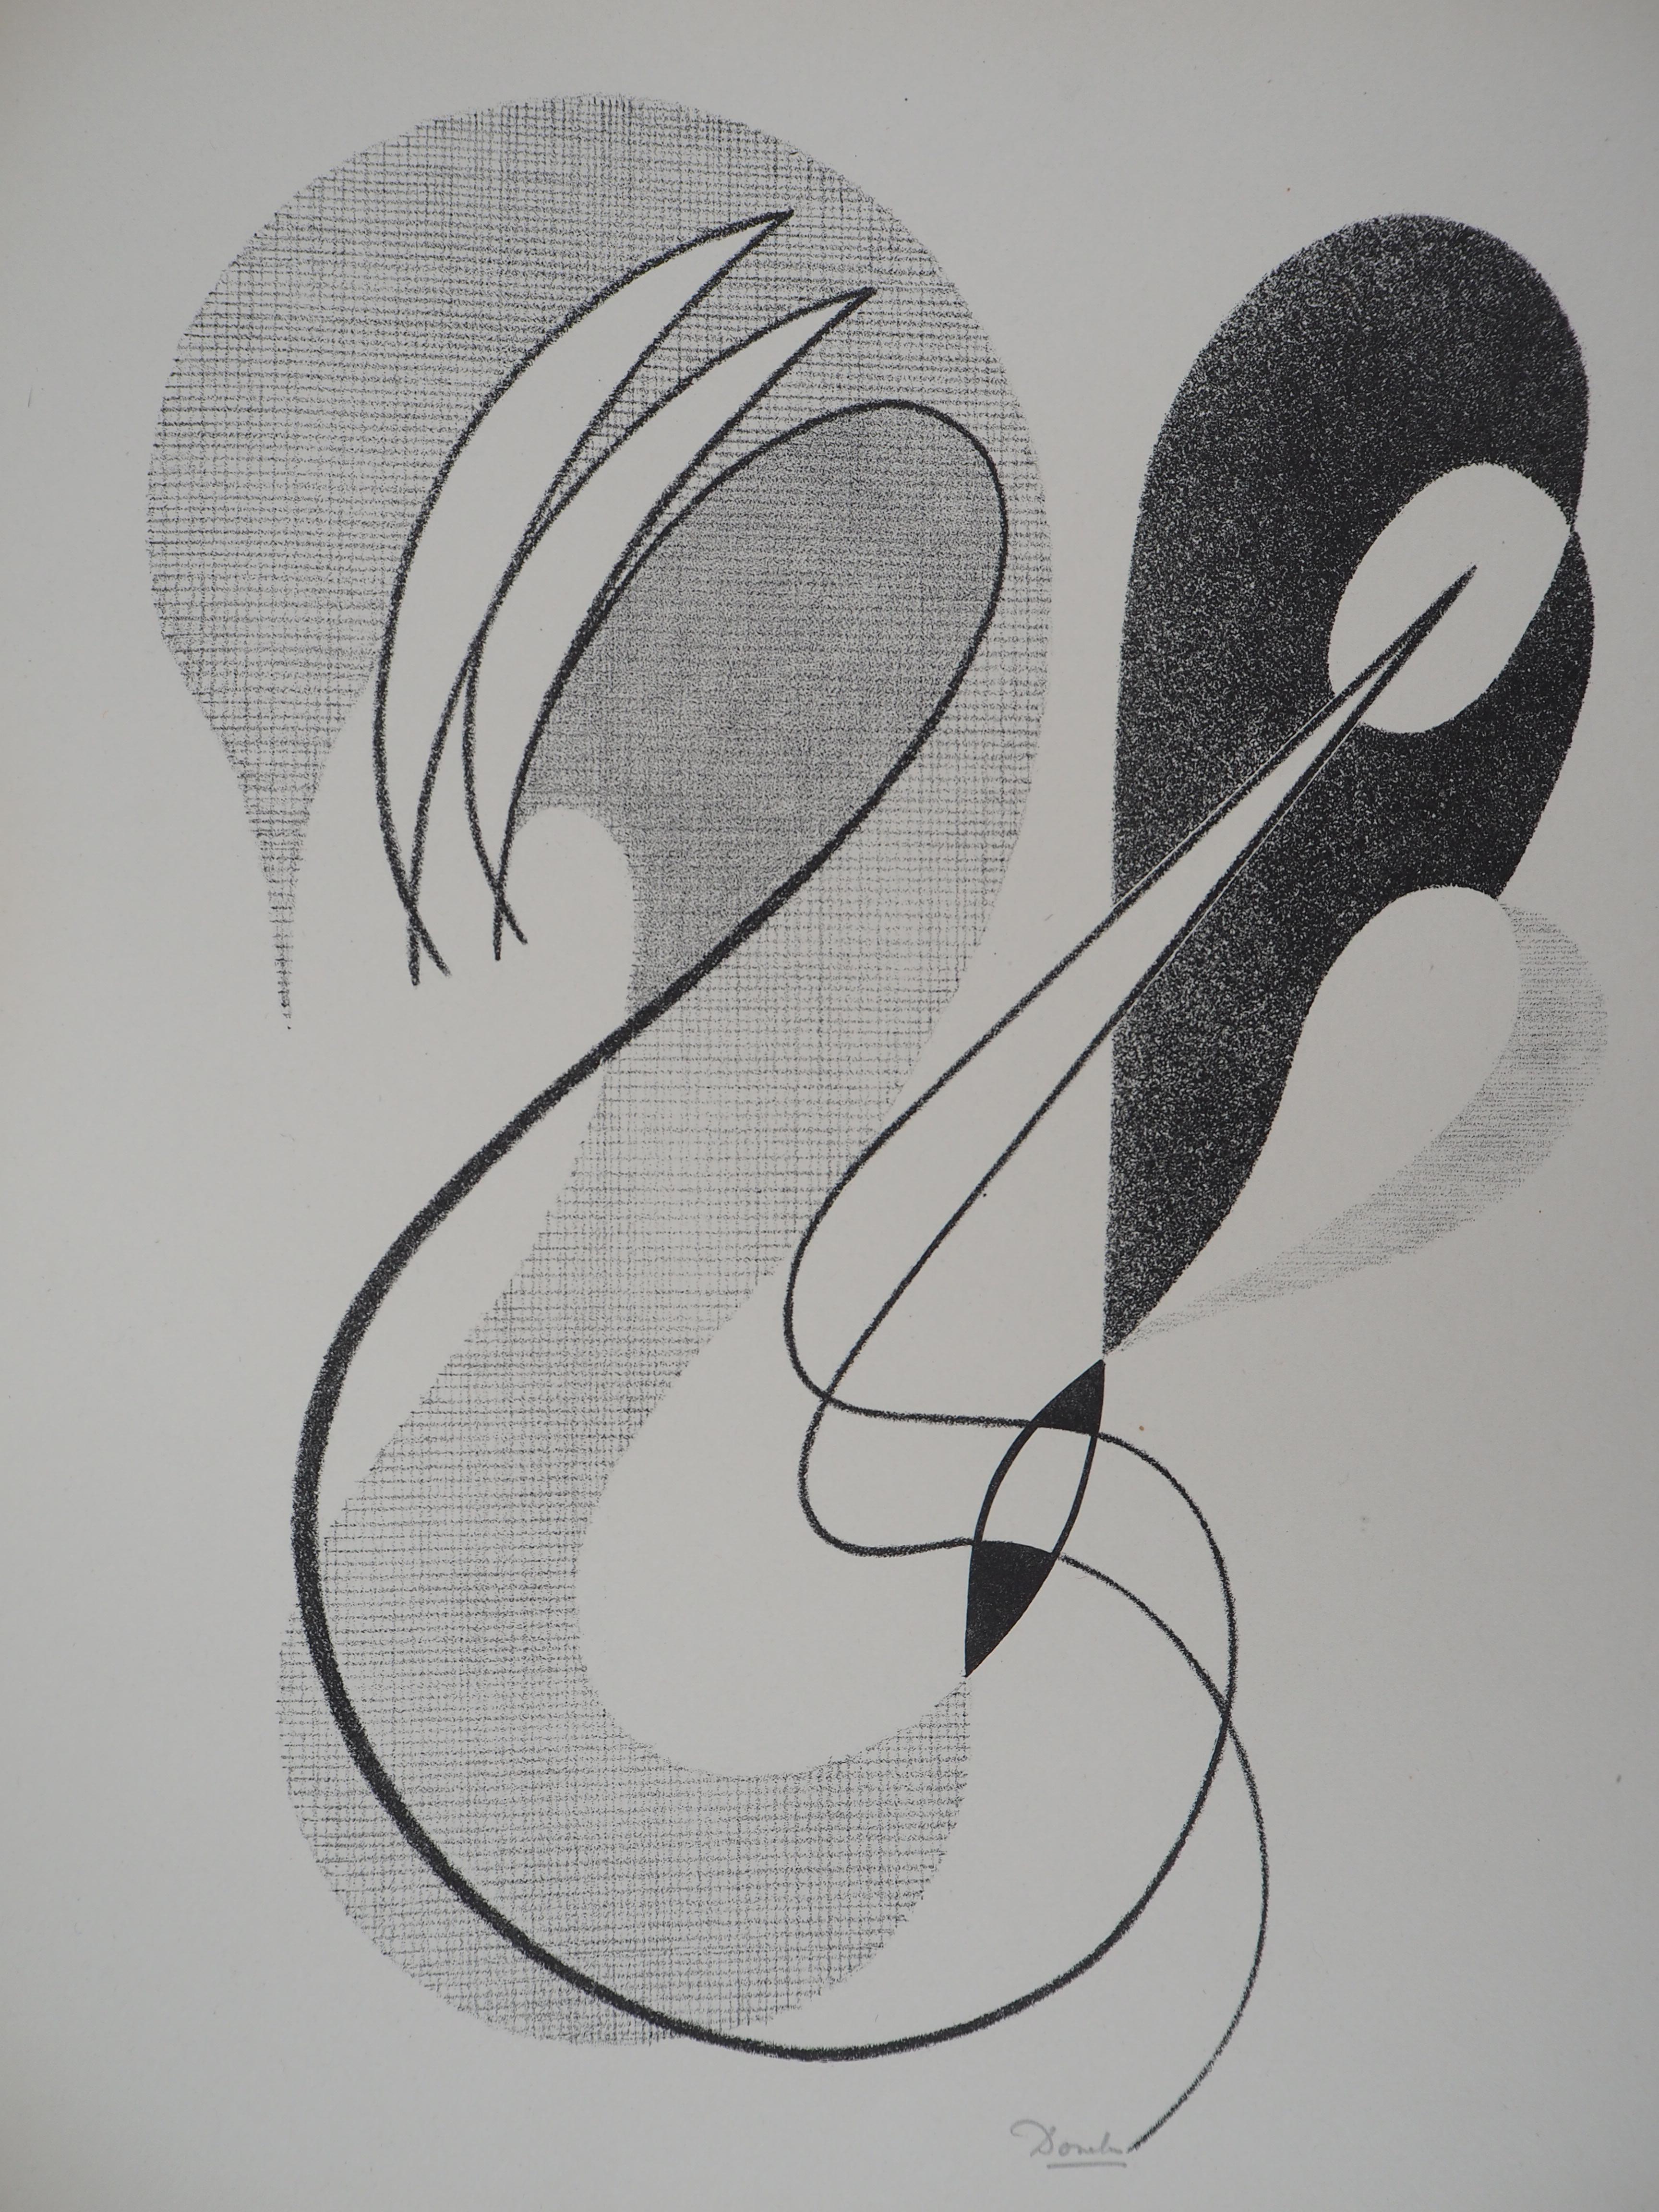 Cesar DOMELA
Abstract Composition, 1946

Original lithograph (printed in Desjobert Workshop)
Handsigned in pencil
Numbered / 100
On Bellegarde vellum 32.5 x 24 cm (c. 13 x 9.5 in)

Very good condition, edge of the sheet lightly yellowed